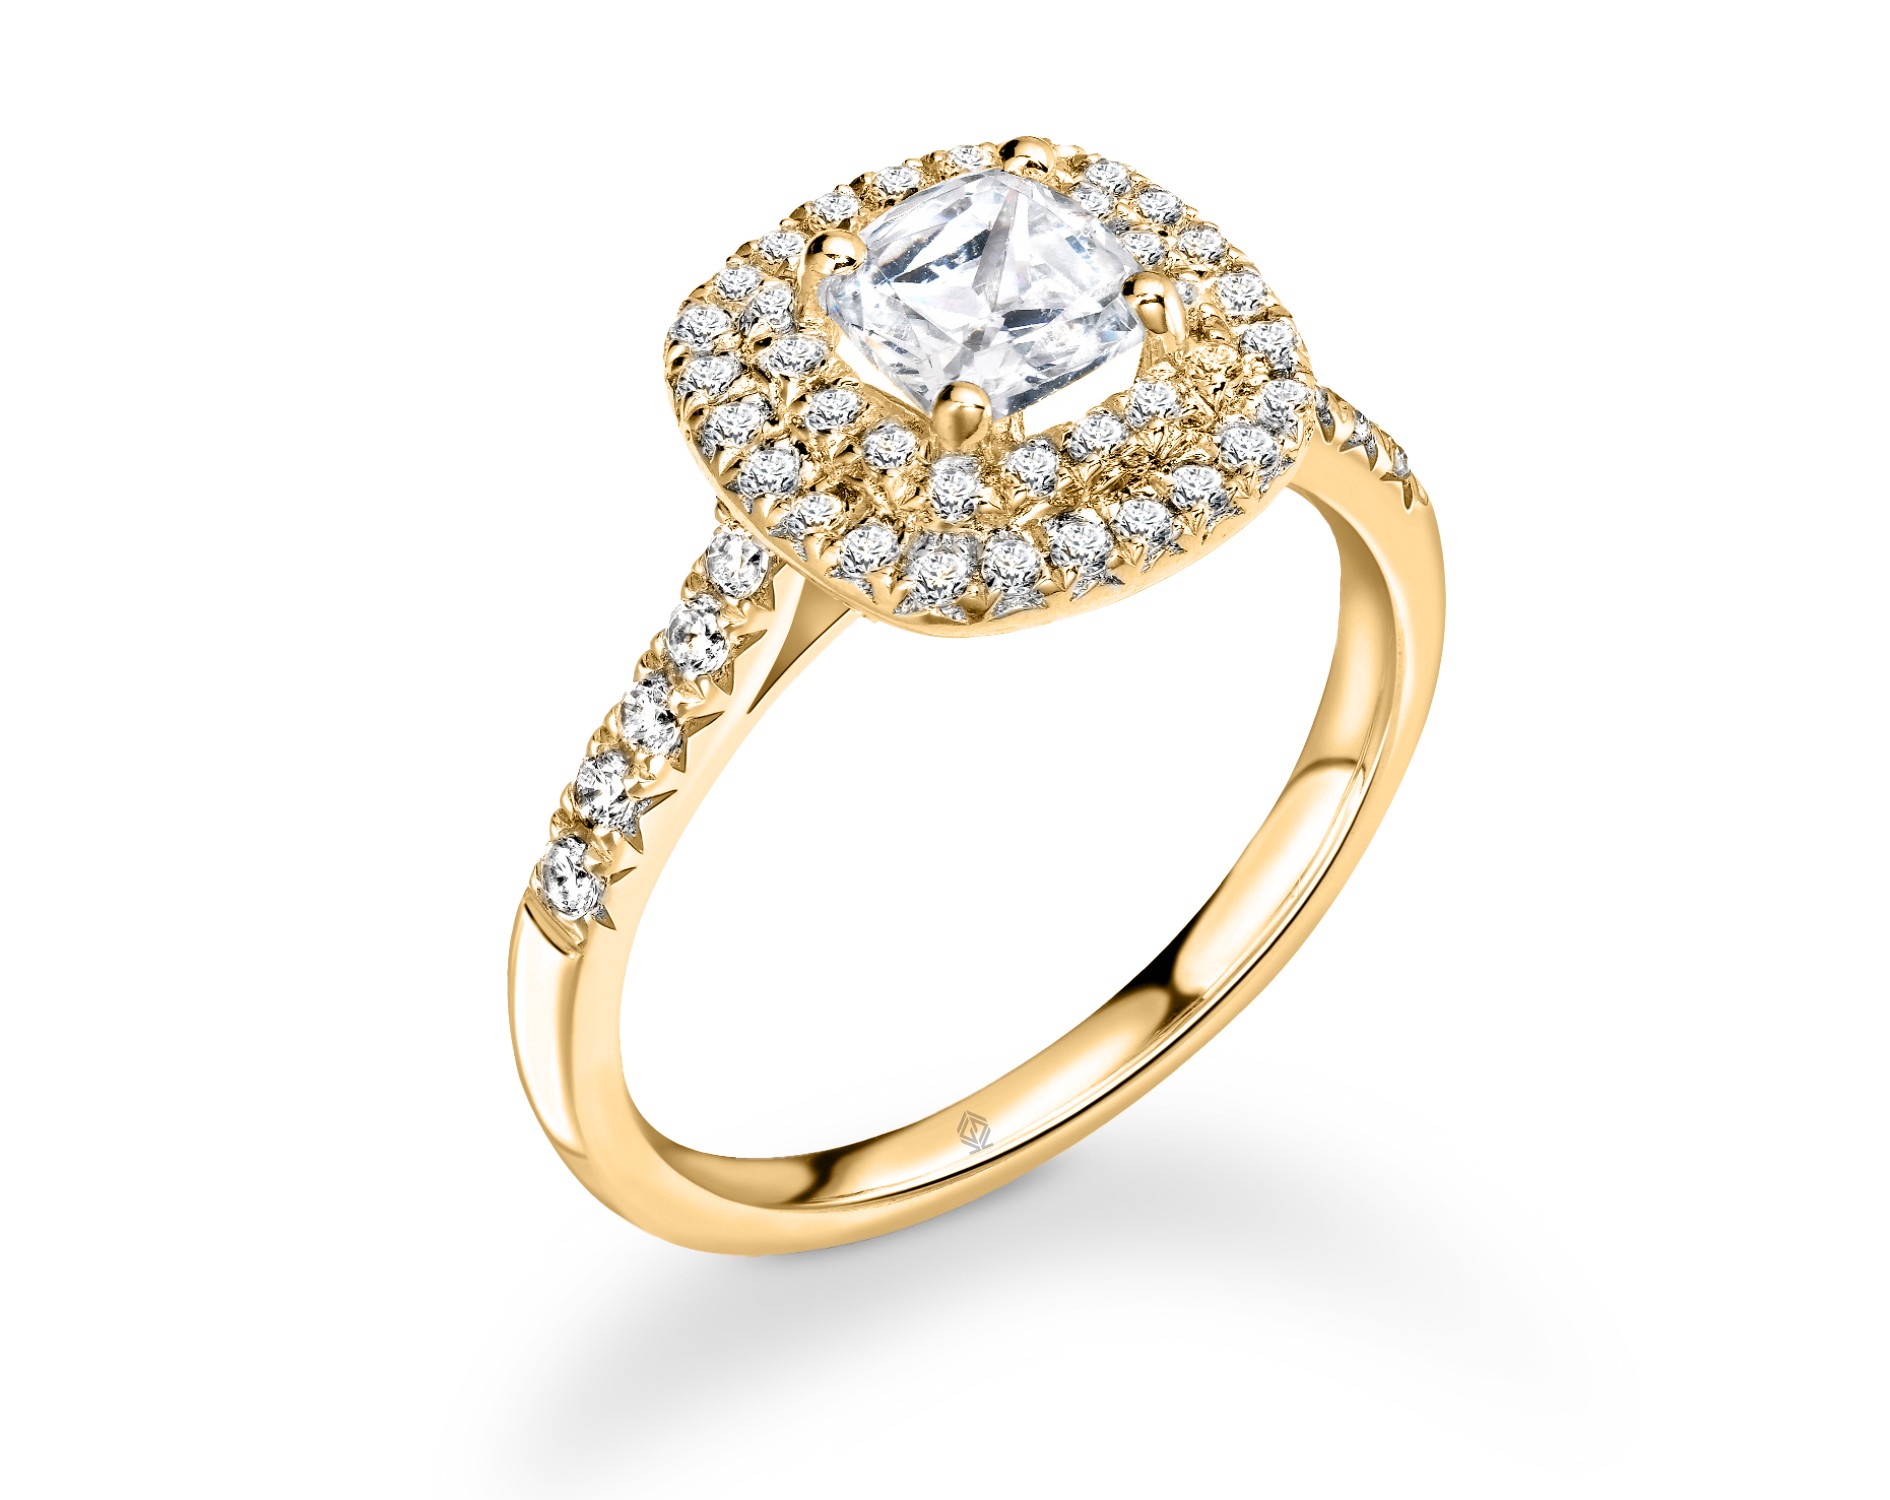 18K YELLOW GOLD DOUBLE HALO CUSHION CUT DIAMOND ENGAGEMENT RING WITH SIDE STONES PAVE SET